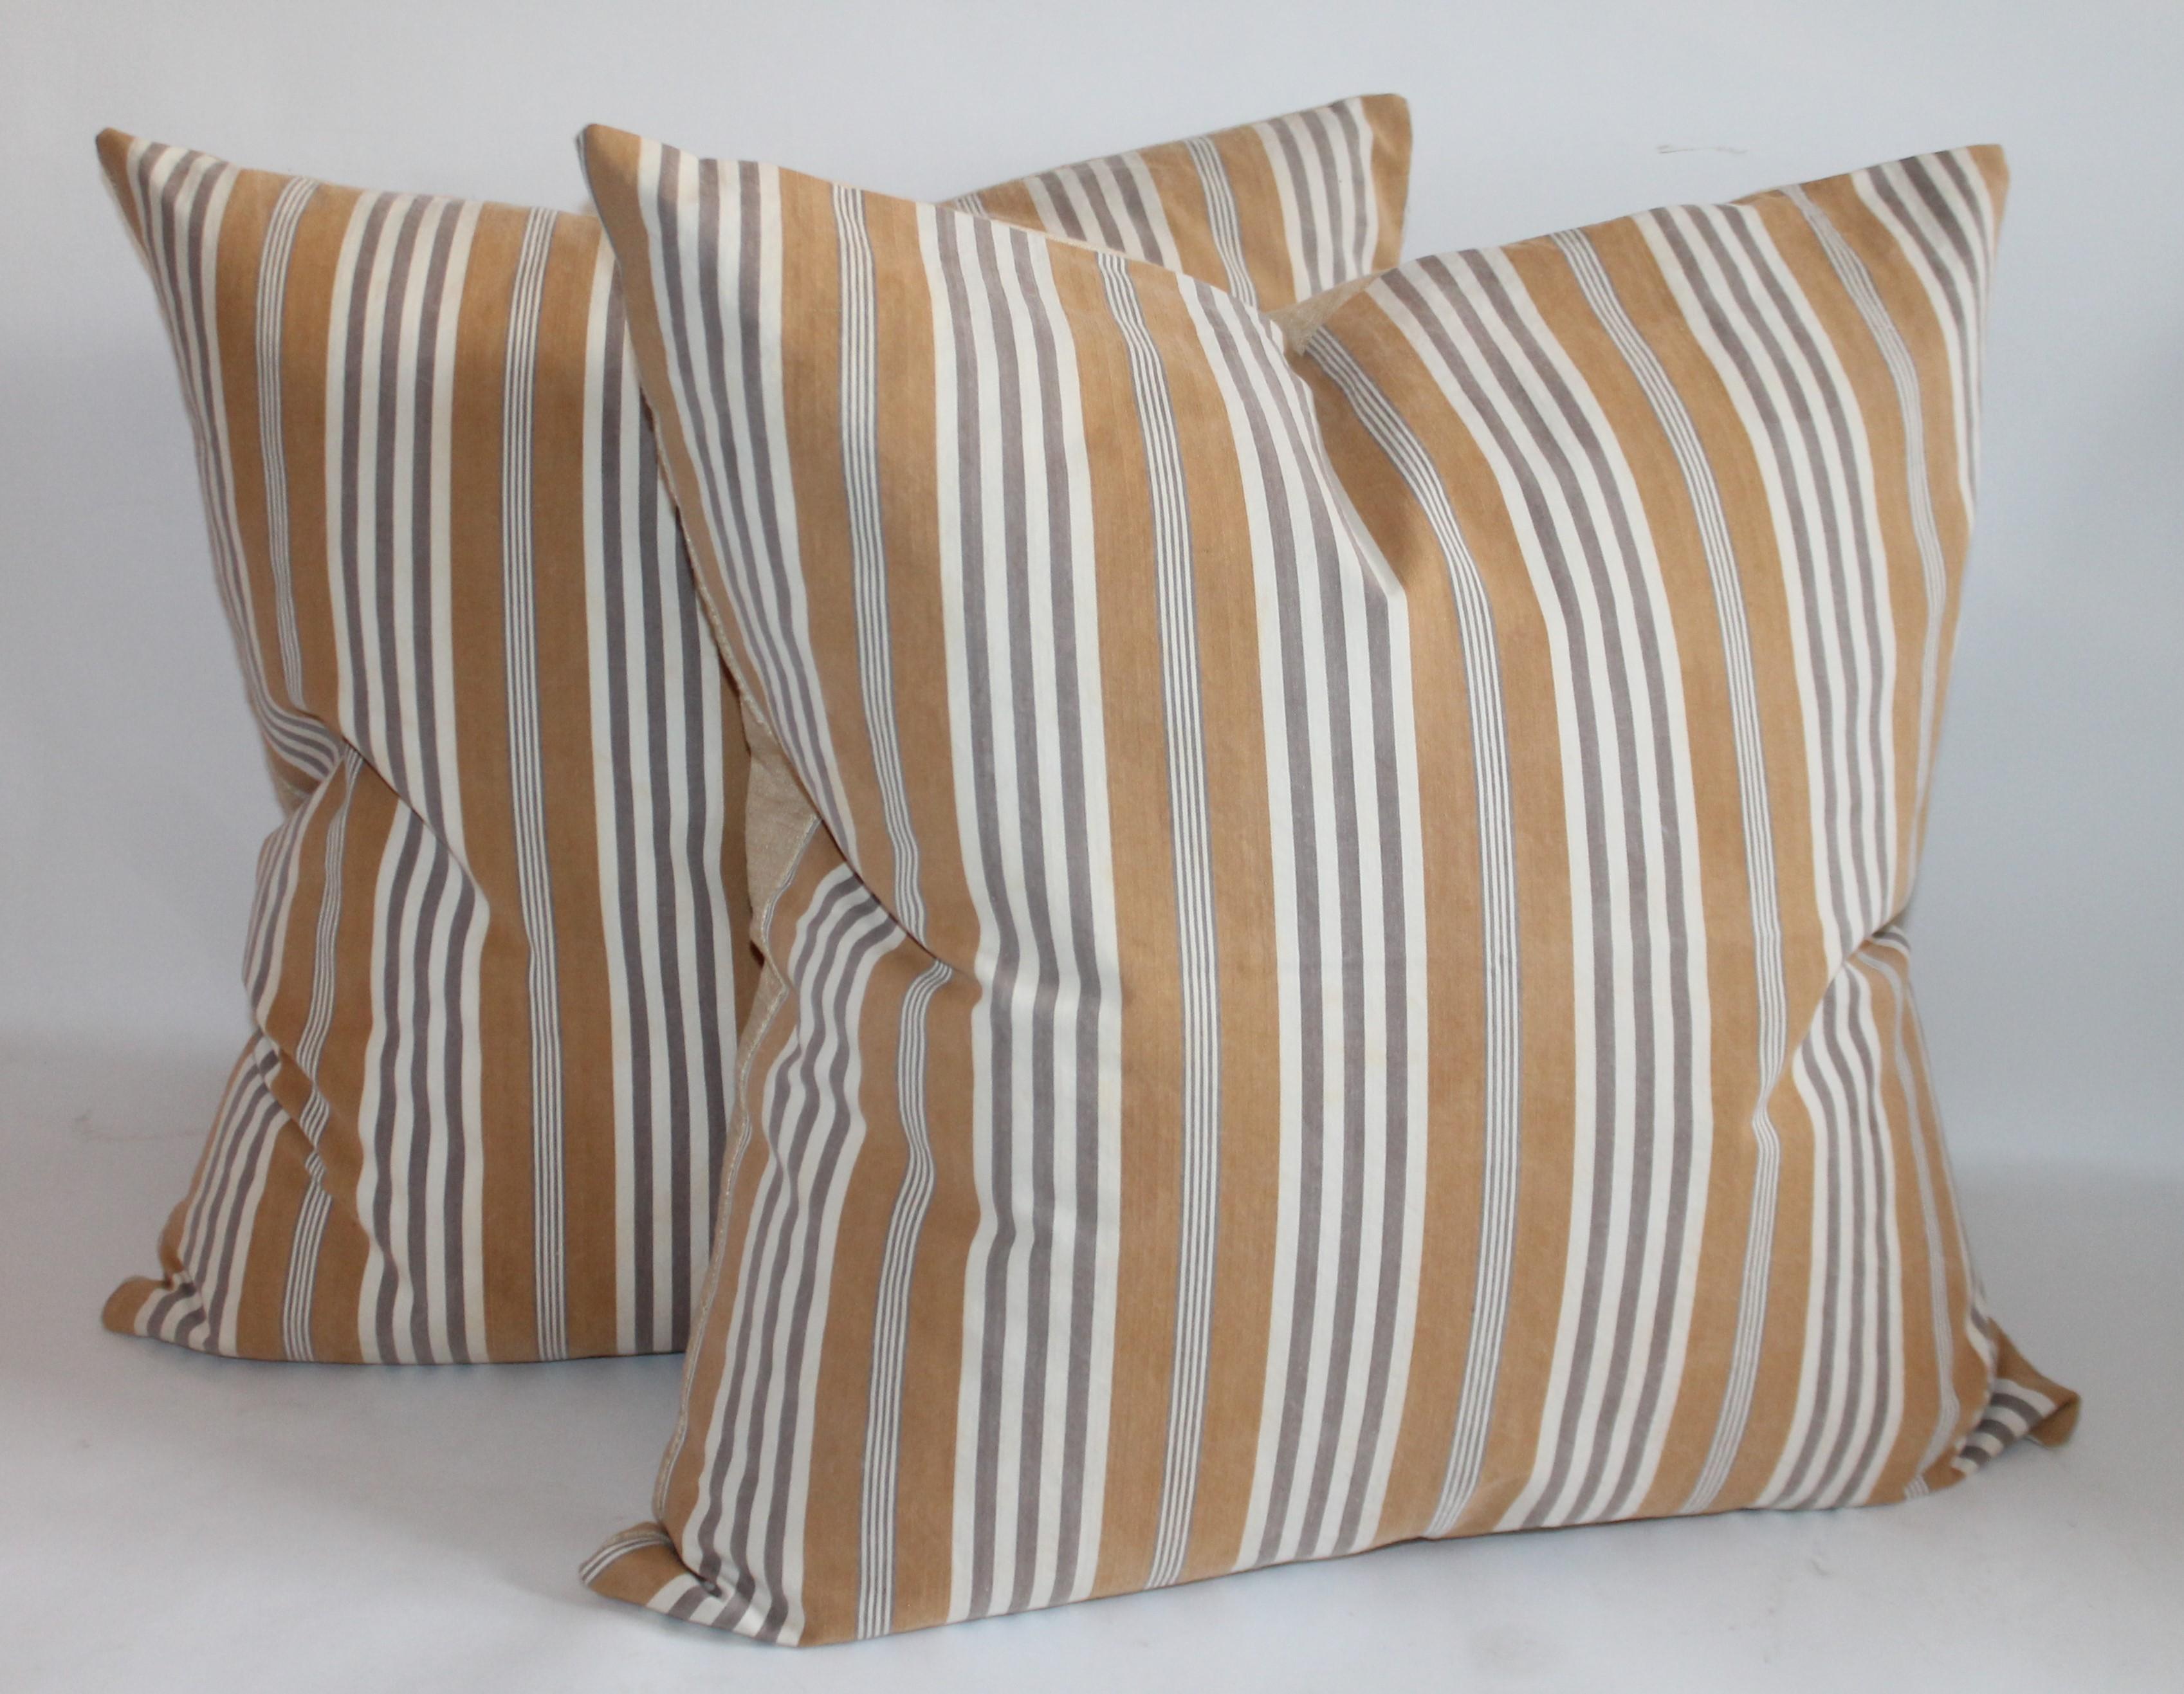 Larger pillows measure 22 x 22 goldish /tan with grey and white striping.
Smaller pillows measure 20 x 20 yellow and narrow blue and white stripes.